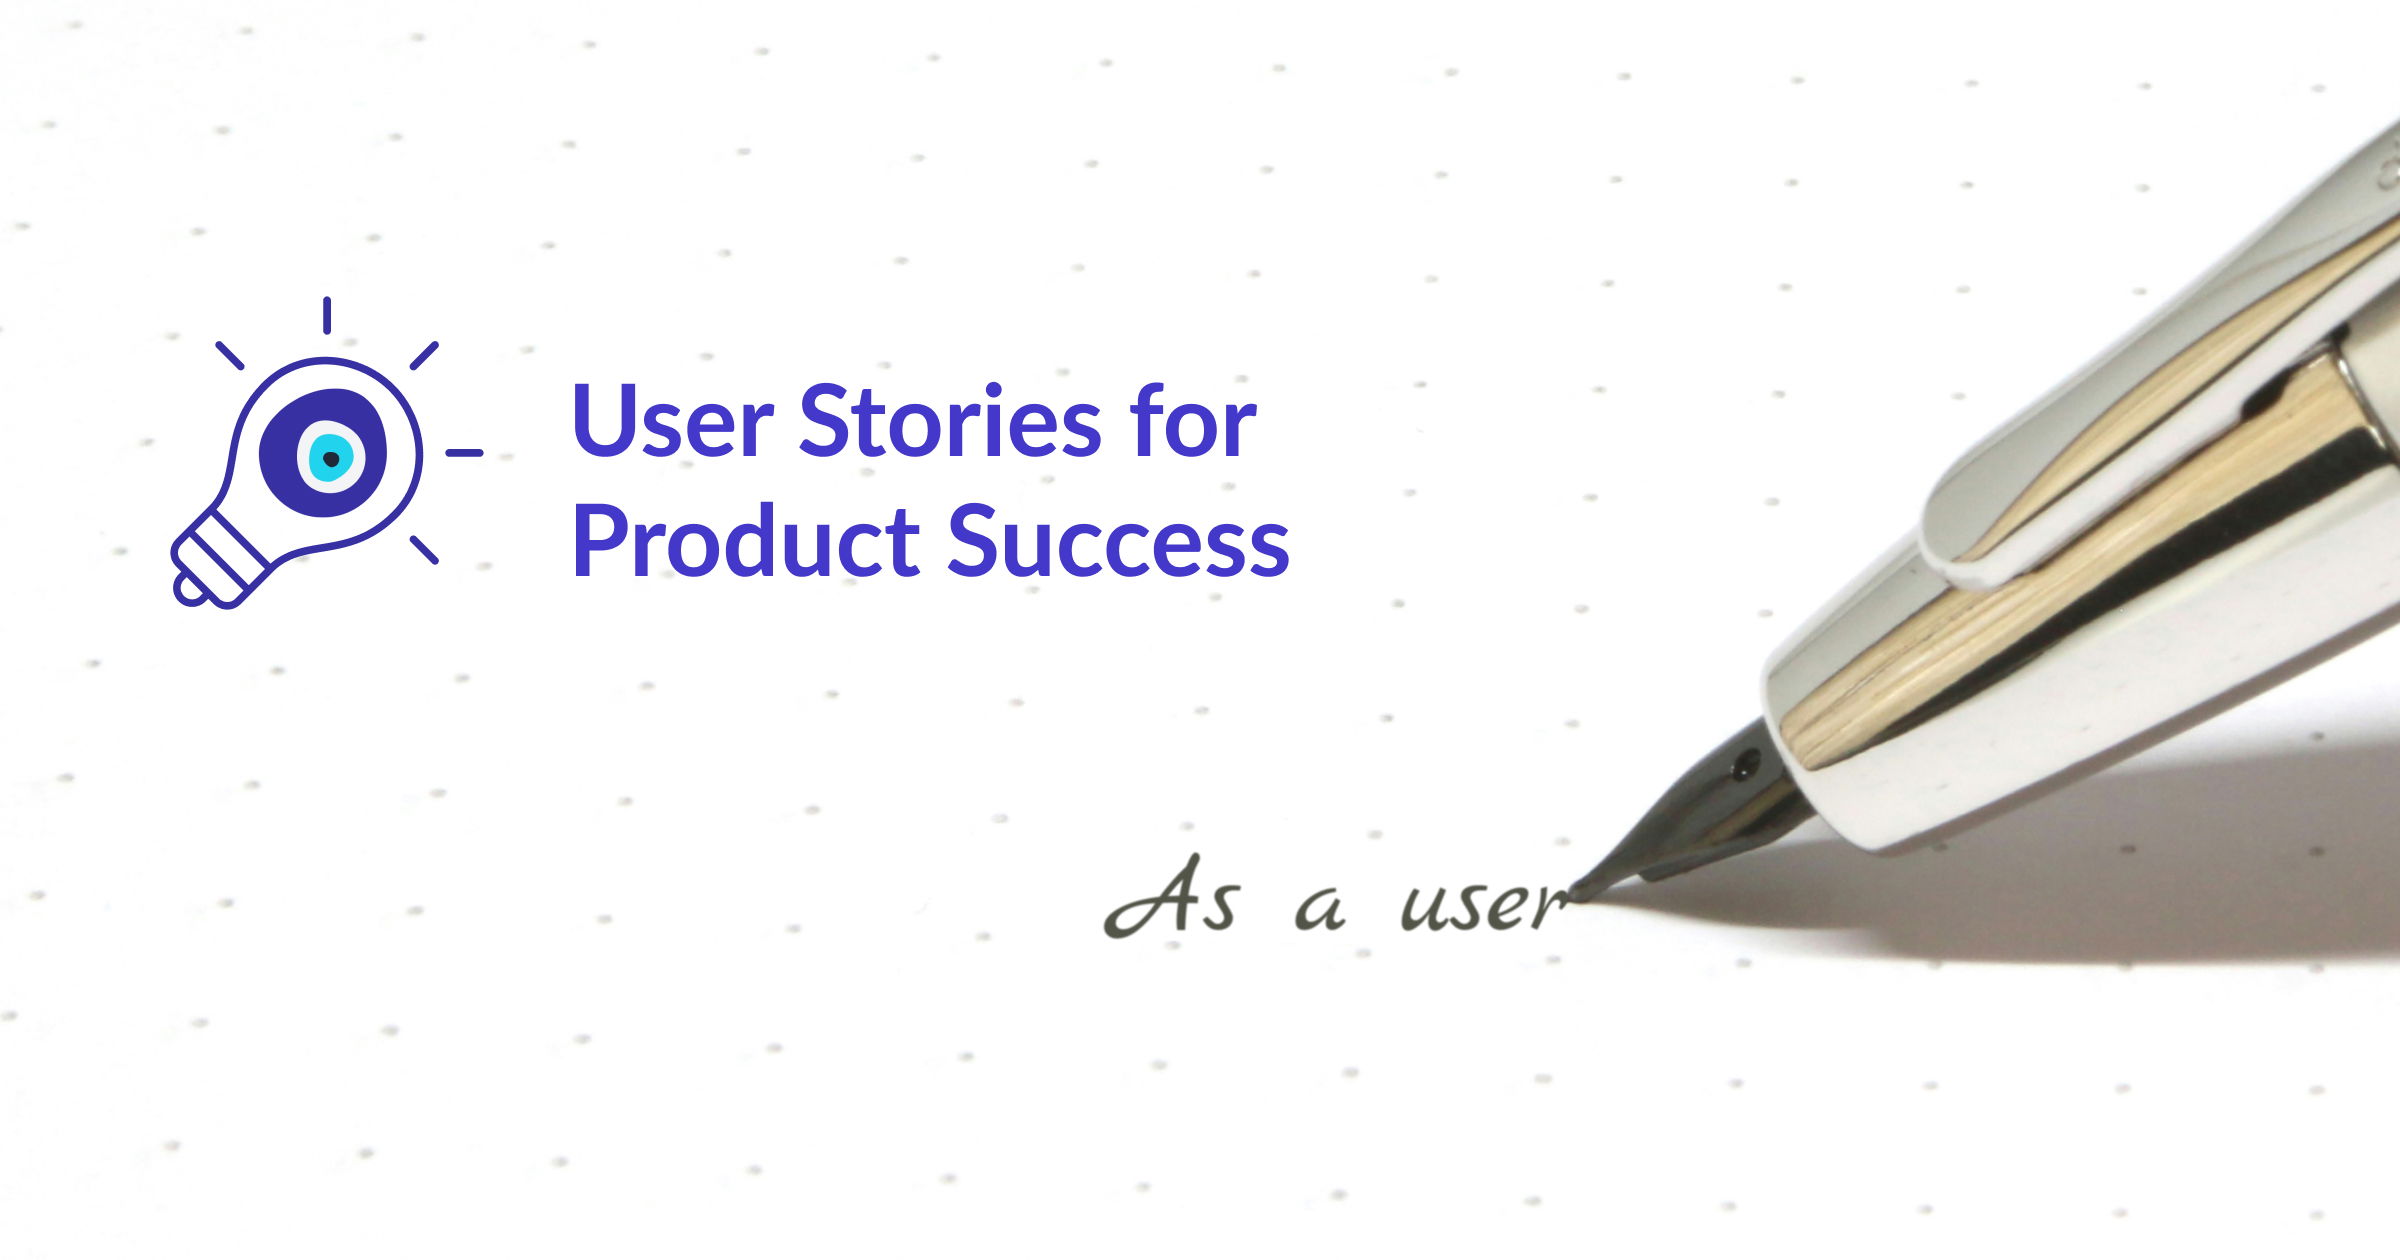 Text saying "User stories for product success" and a pen writing "As a user"